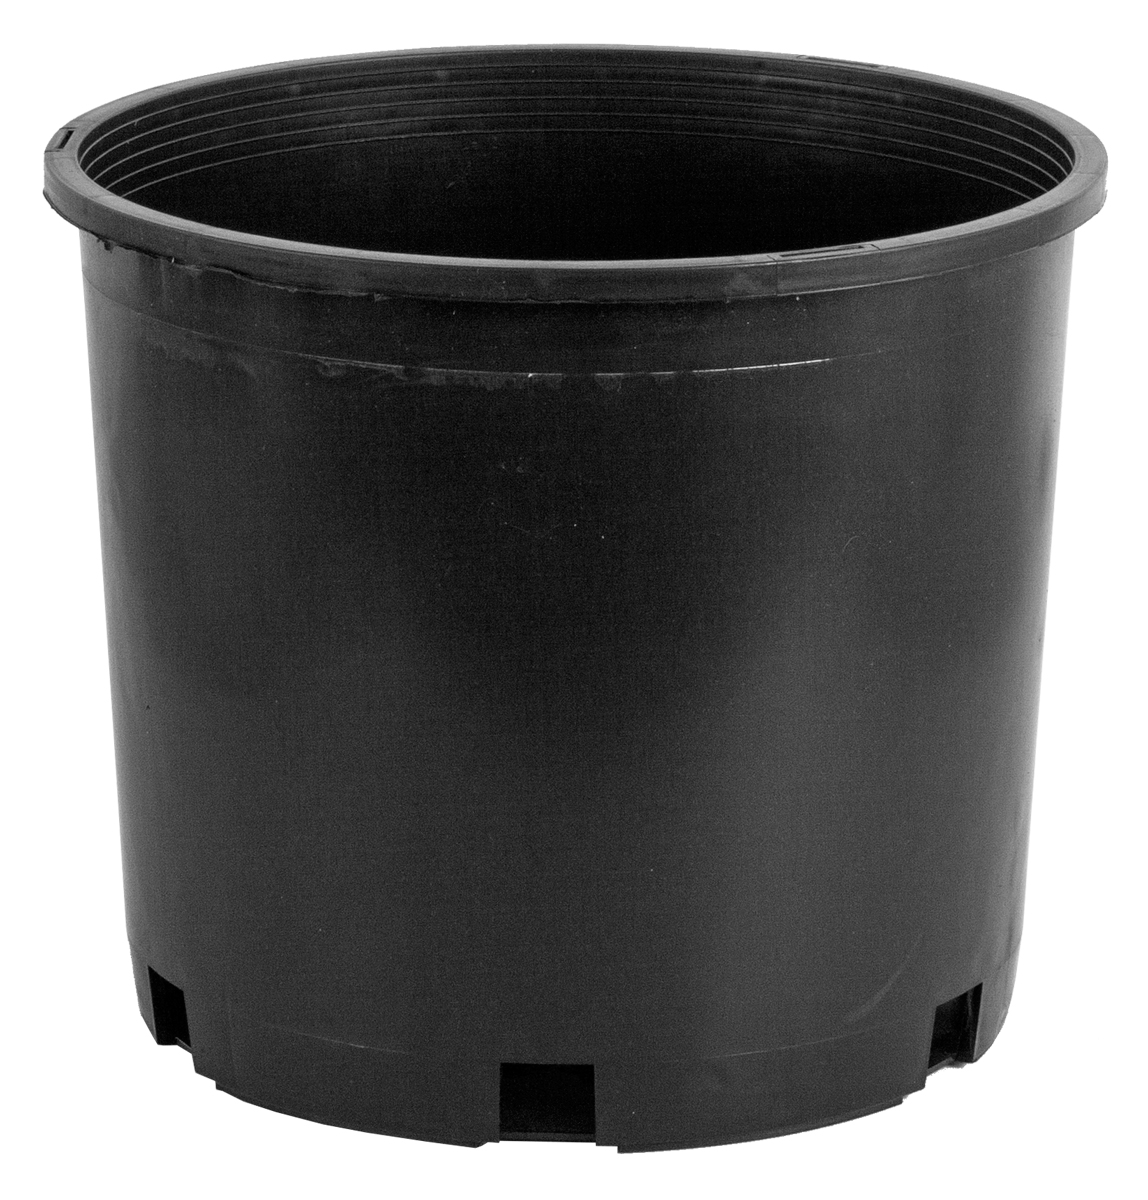 Picture for Pro Cal Premium Nursery Pot, 5 gal